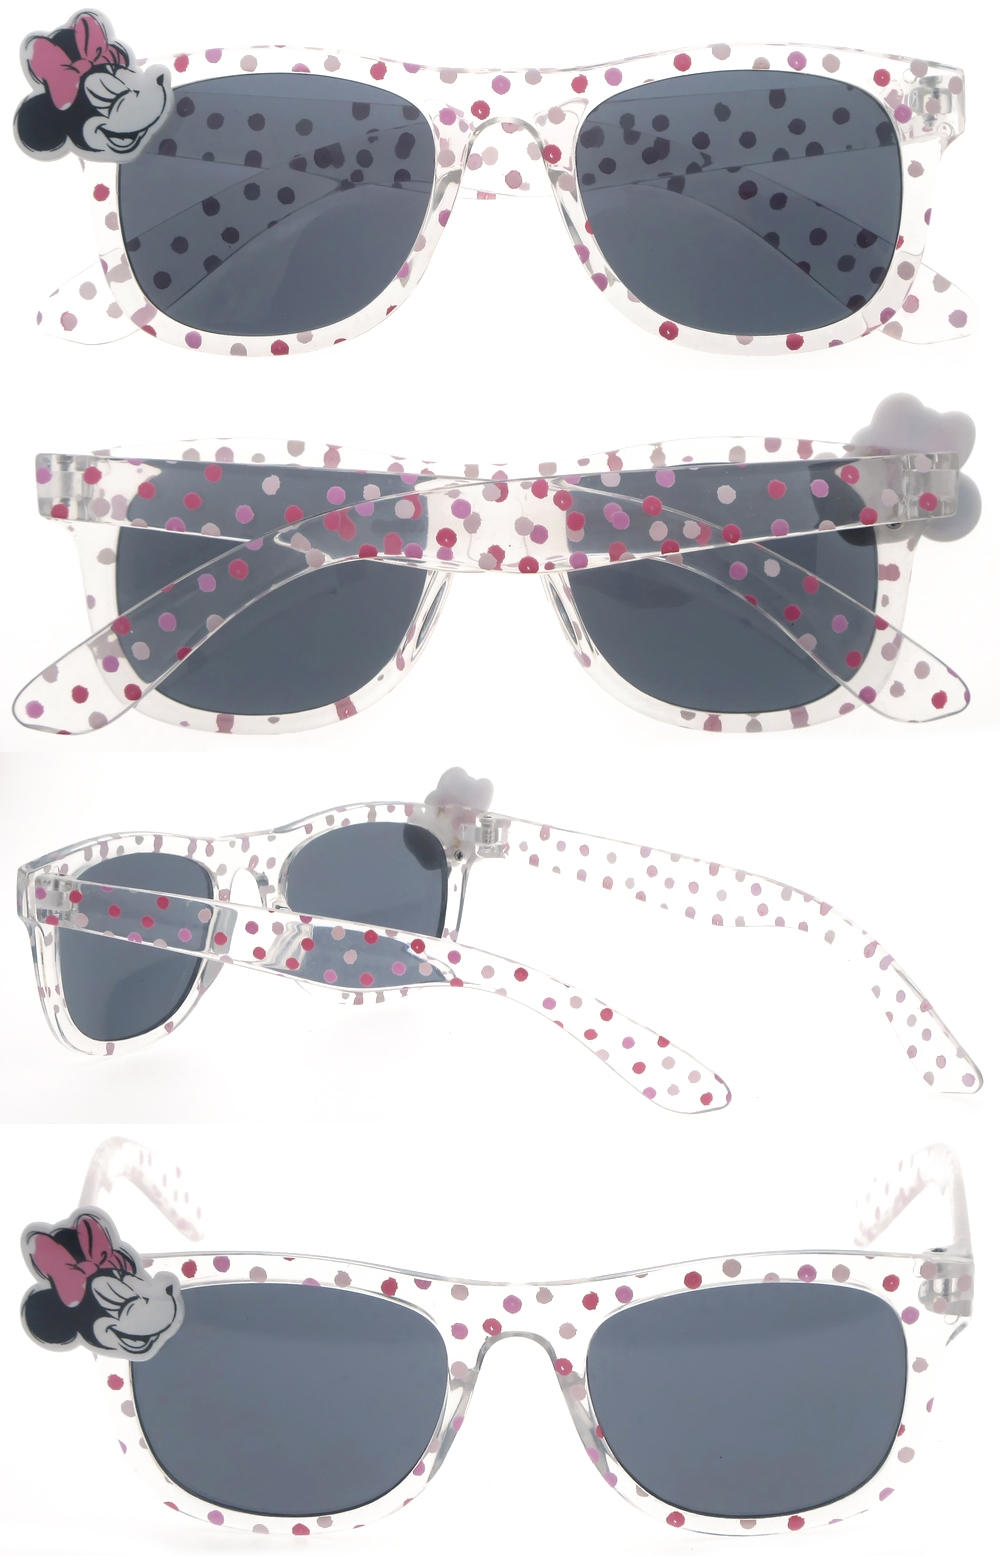 Dachuan Optical DSPK342012 China Manufacture Factory New Arrival Cute Children Sunglasses with Screw Hinge (2)